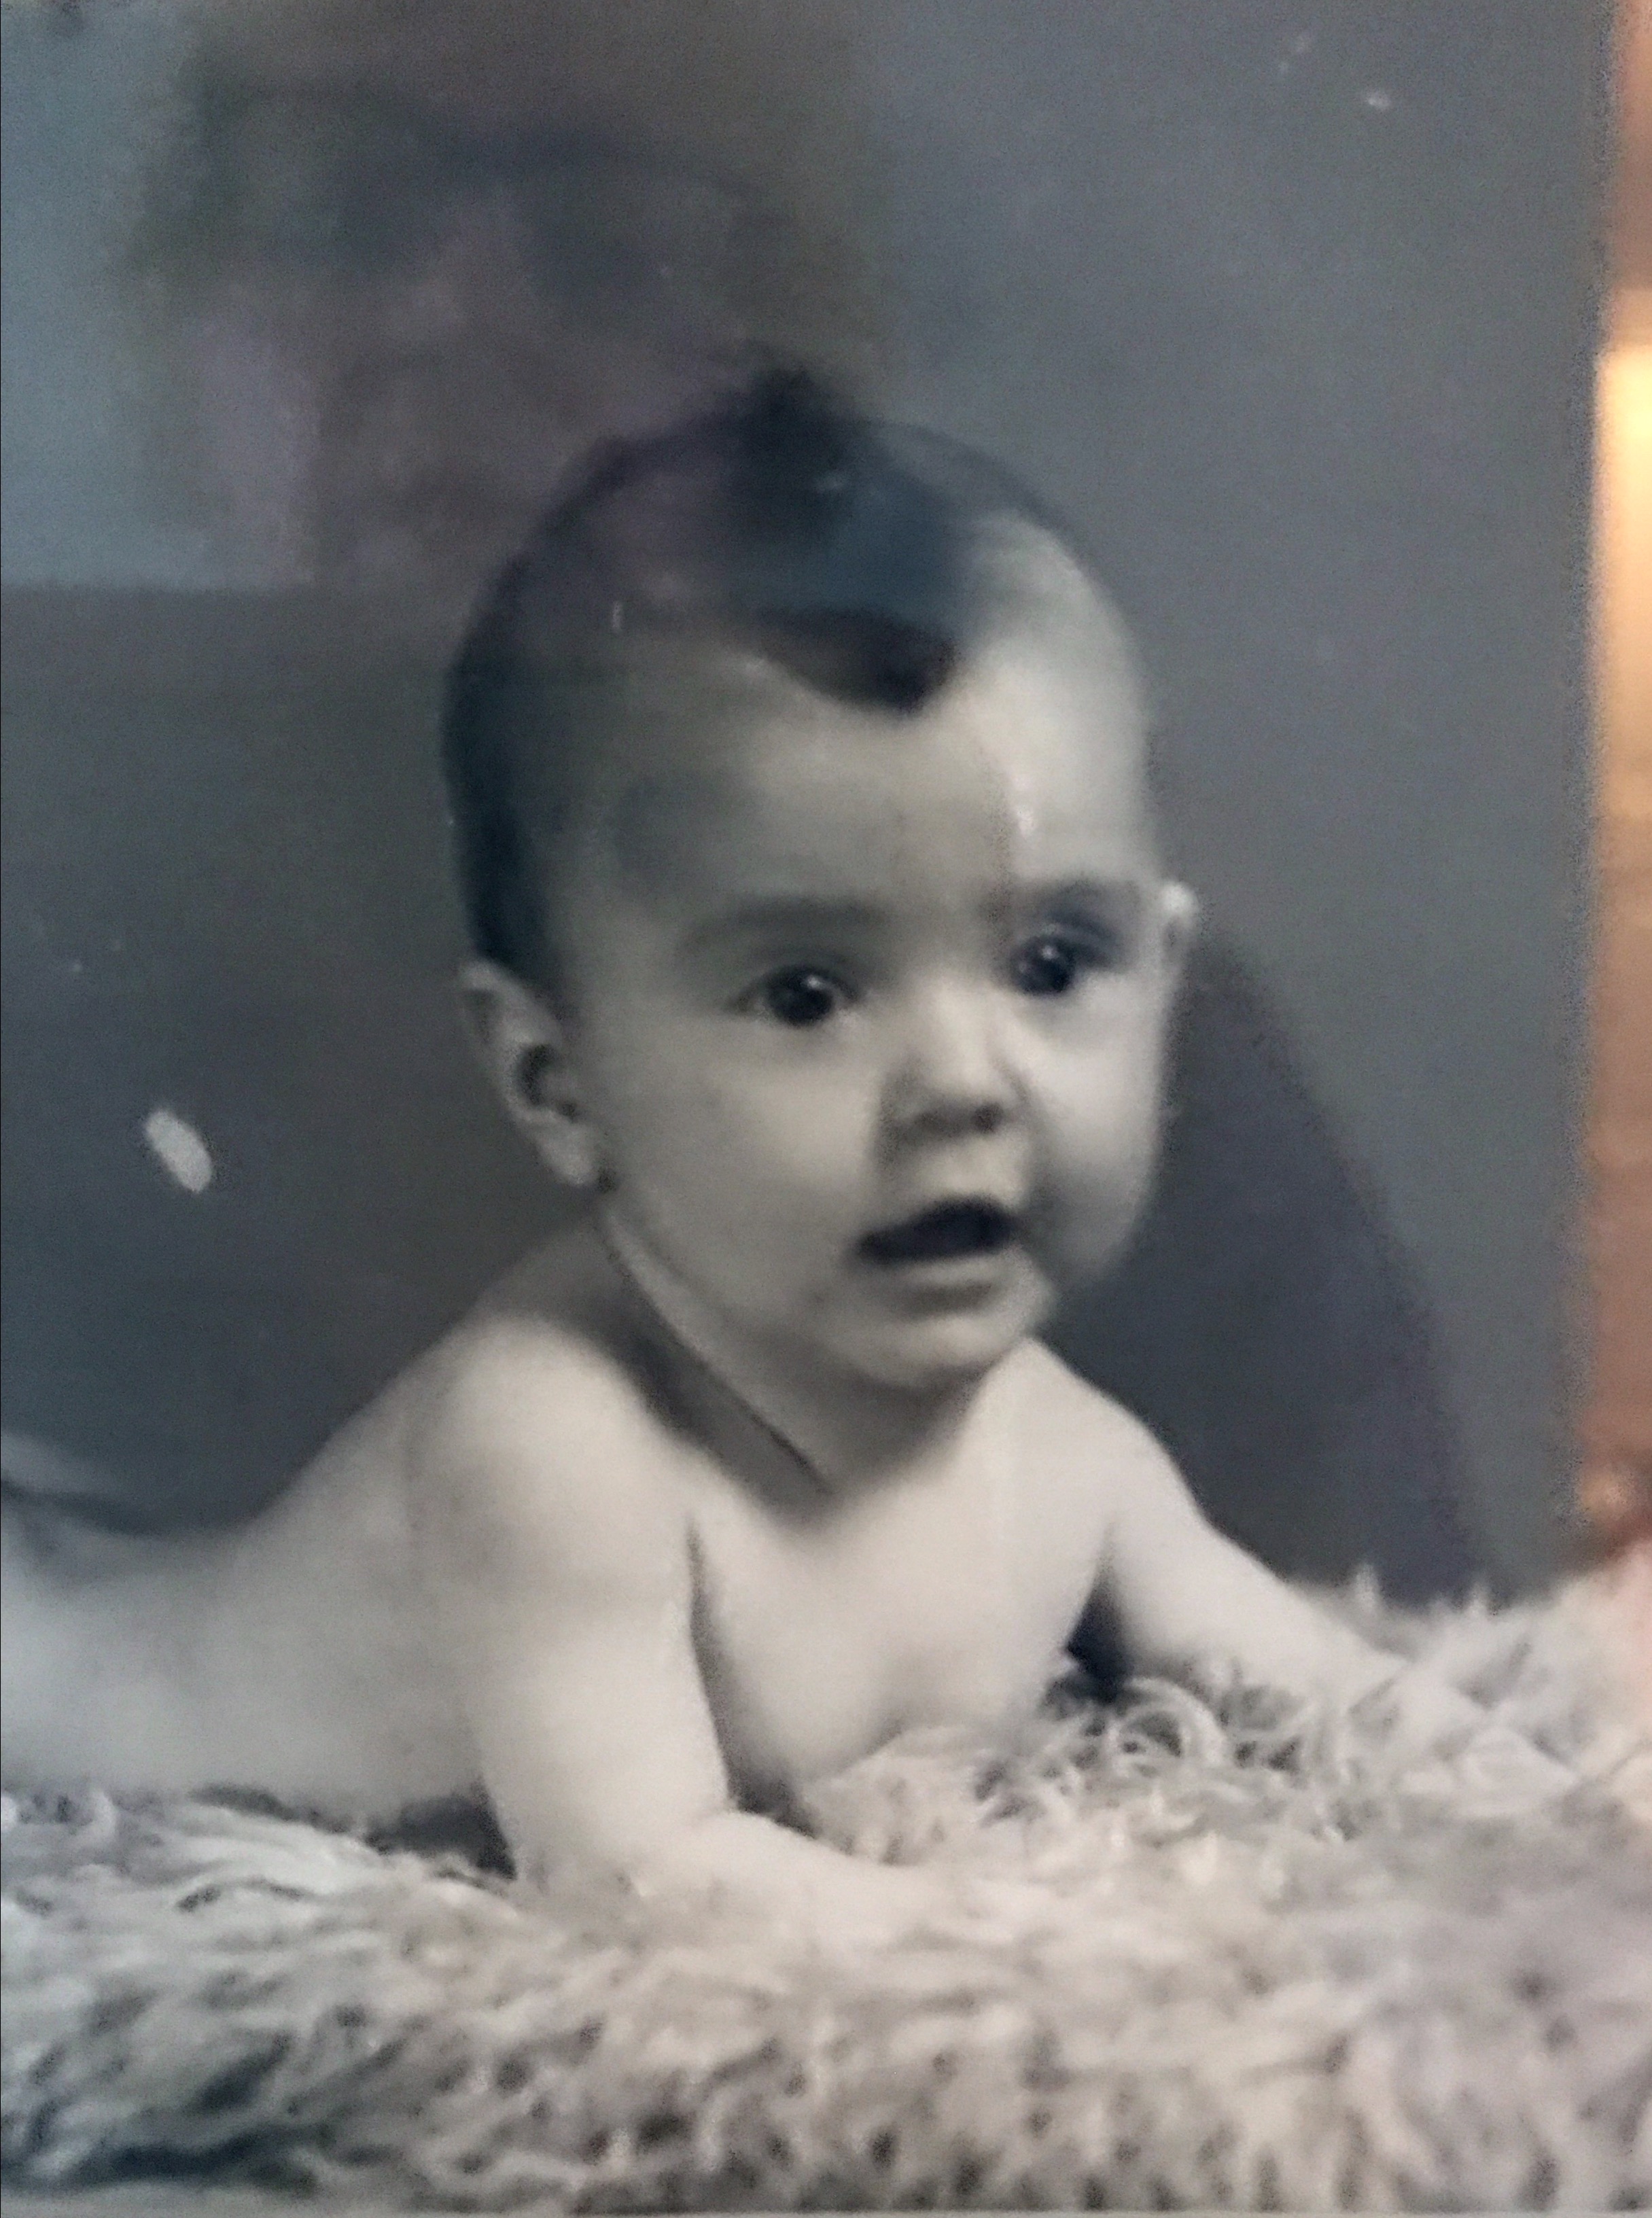 Marlies Baby Picture 4 month old 1941